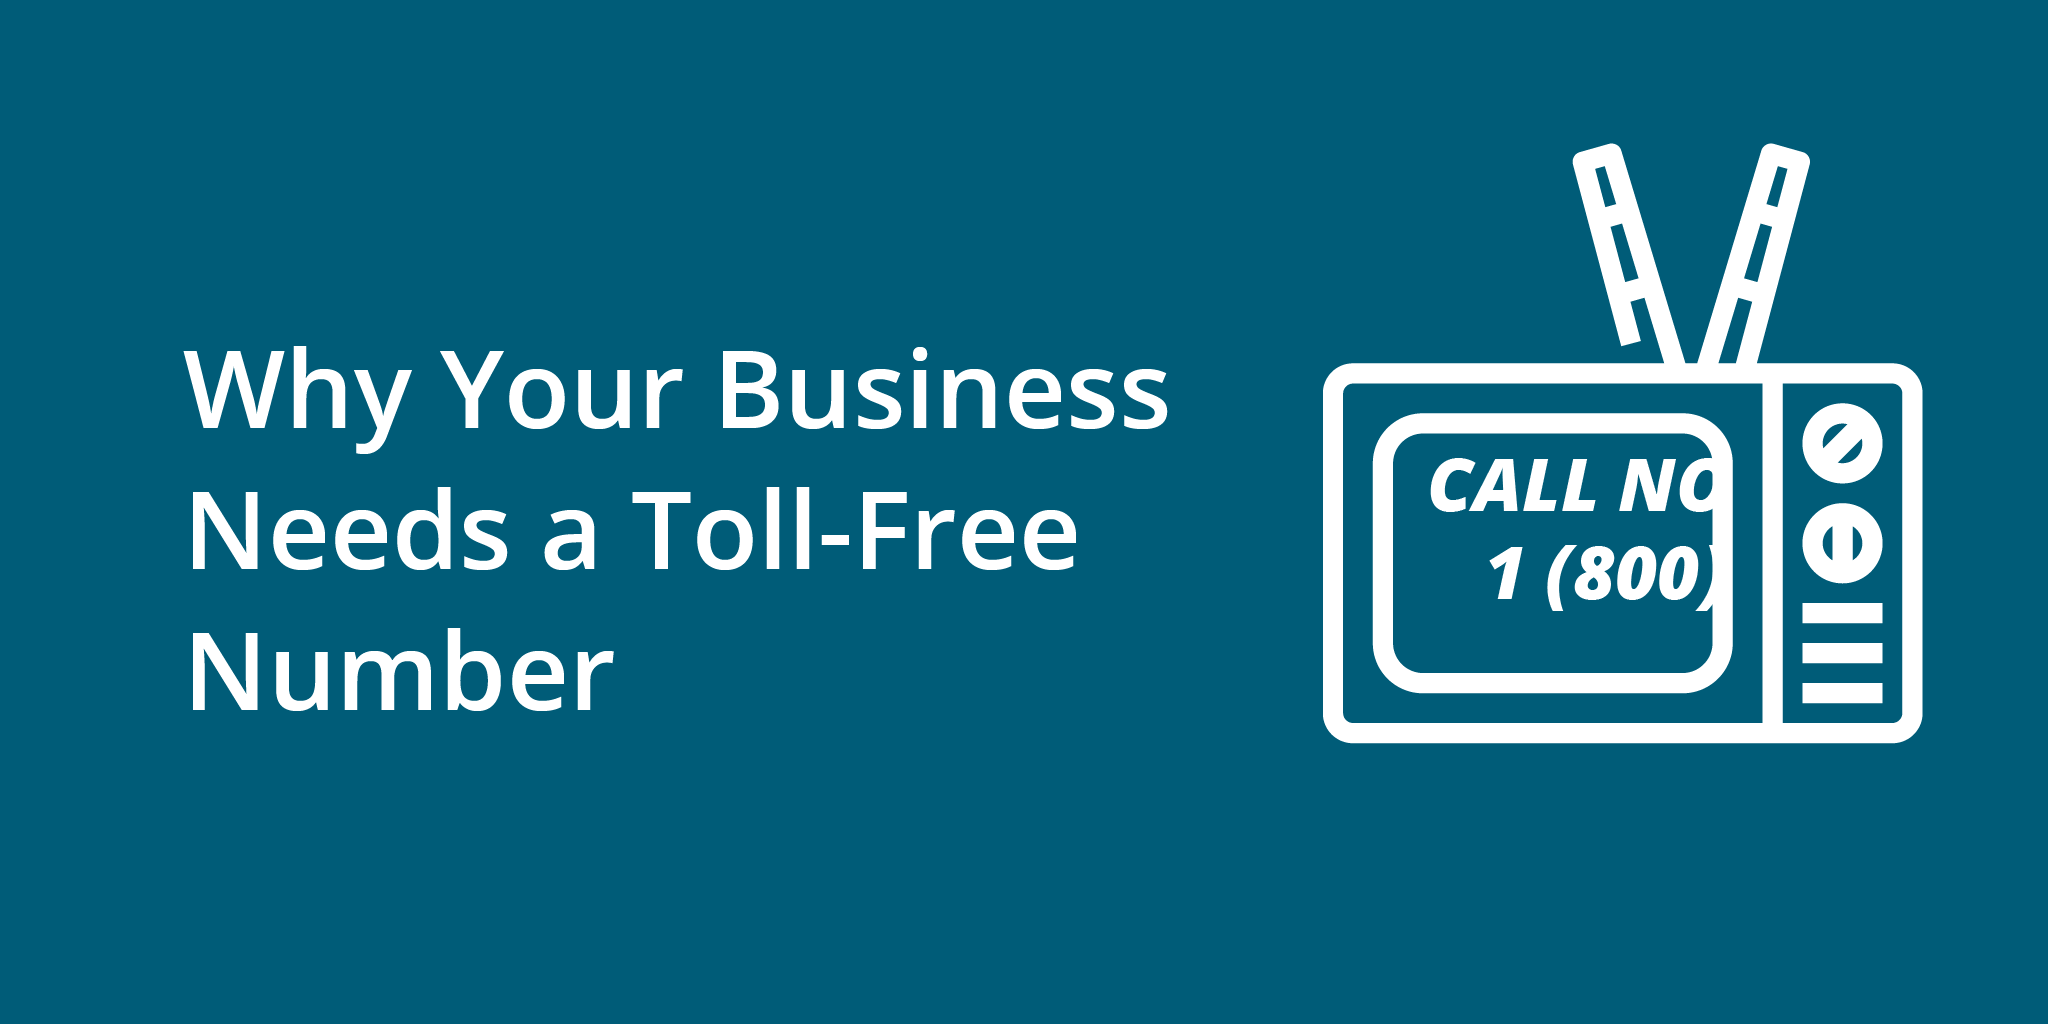 Why Your Business Needs a Toll-Free Number | Telephones for business